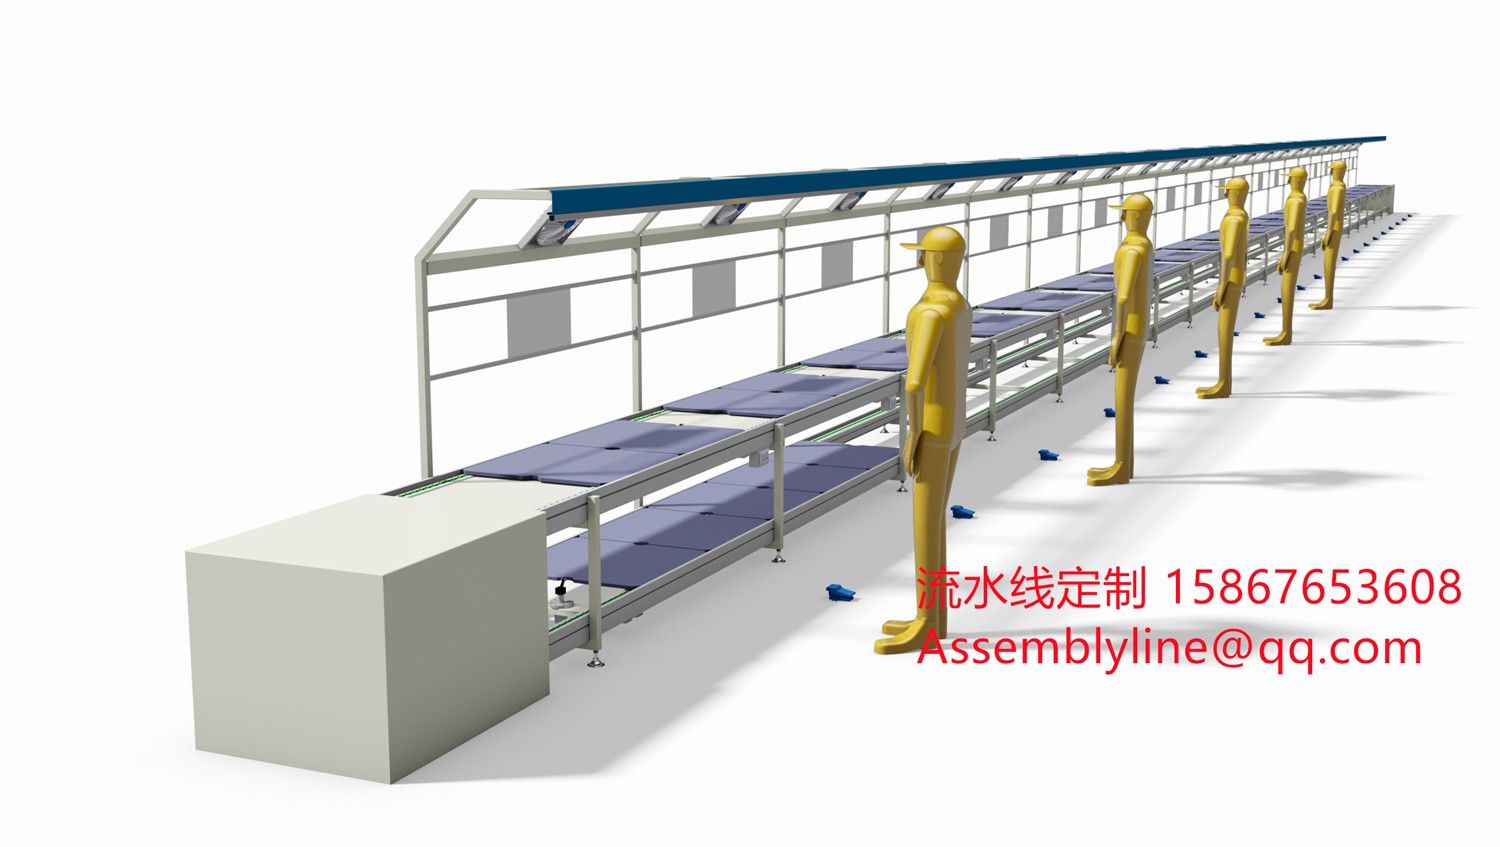 Double-speed chain assembly line Conveyor